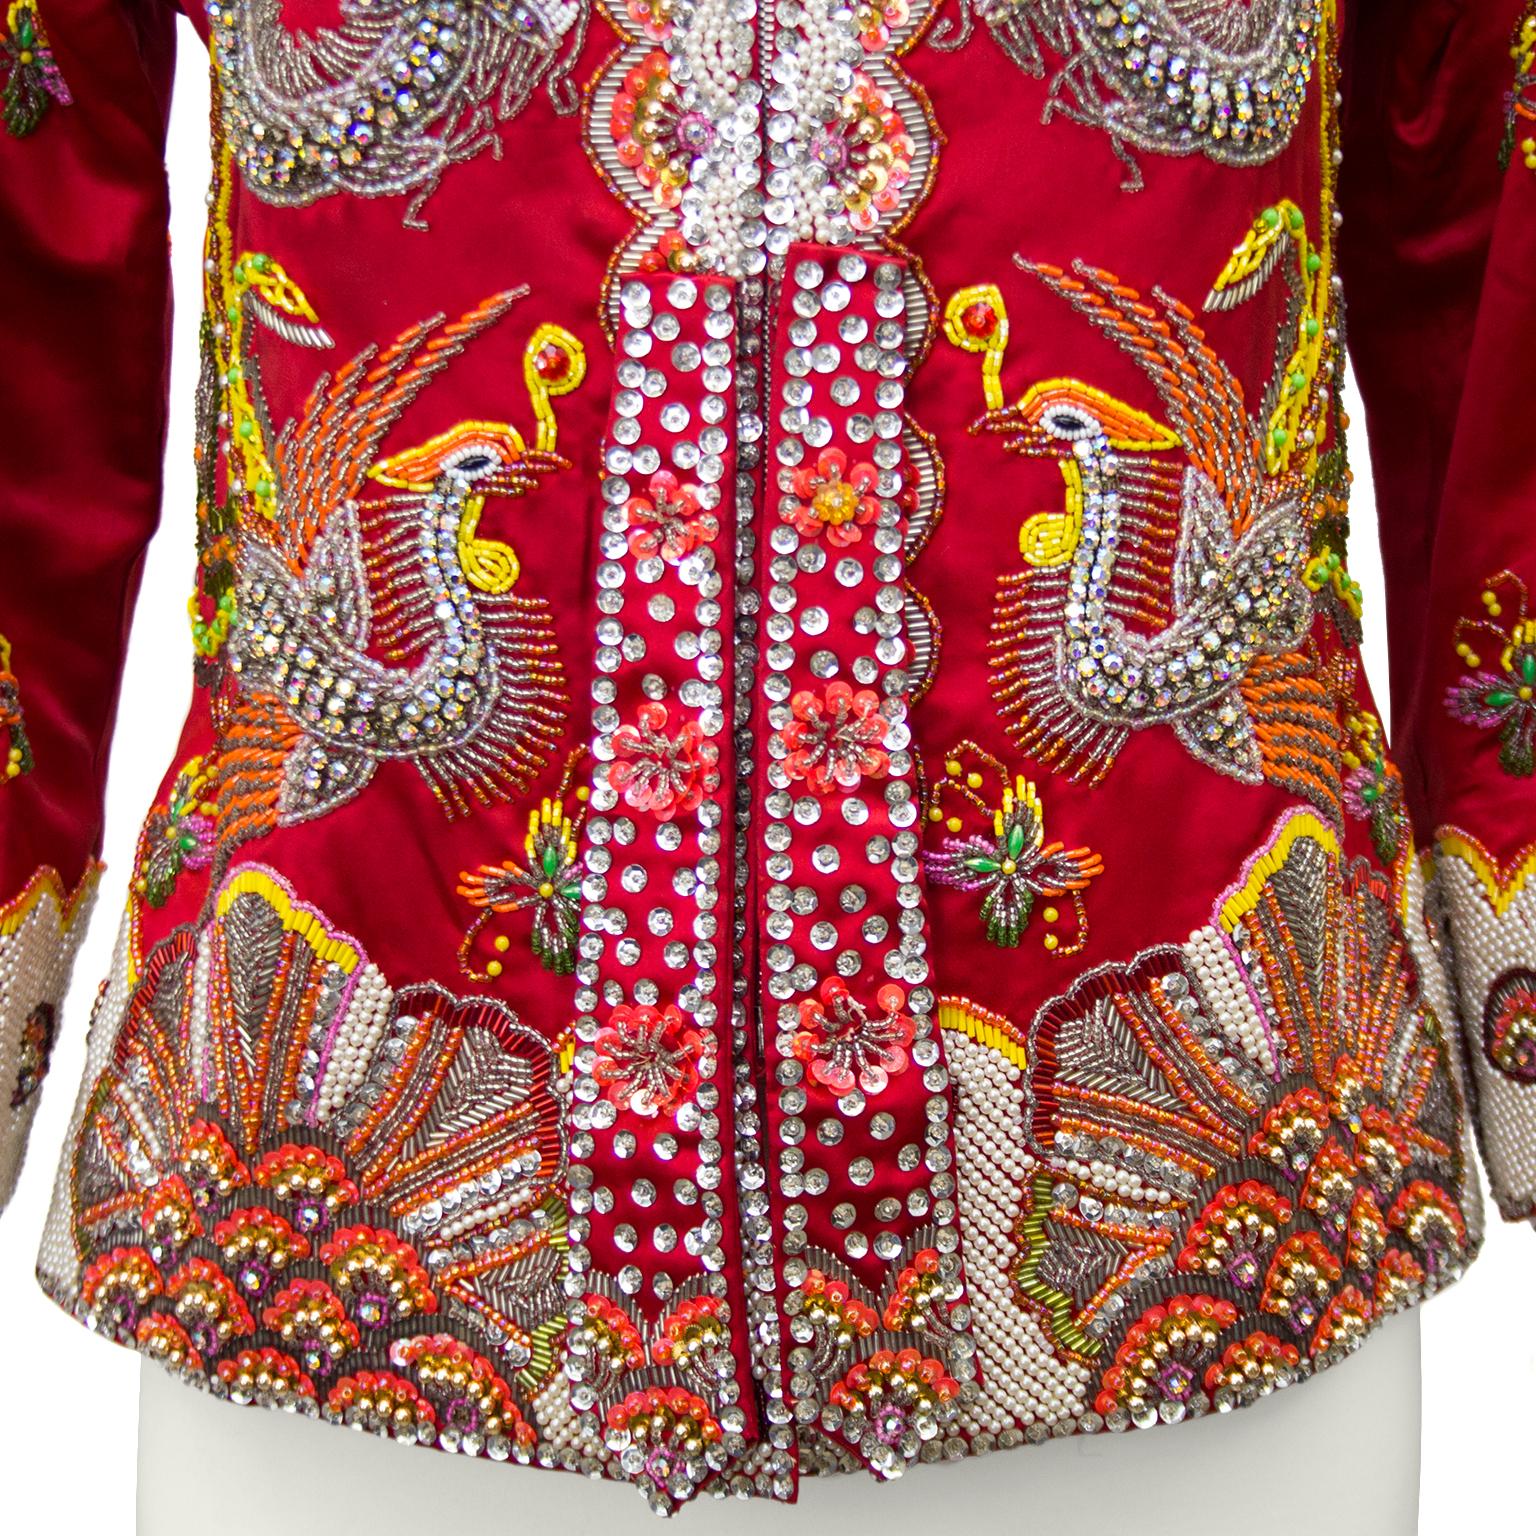 Brown Dynasty Red Dragon and Phoenix Beaded Jacket, 1960s 